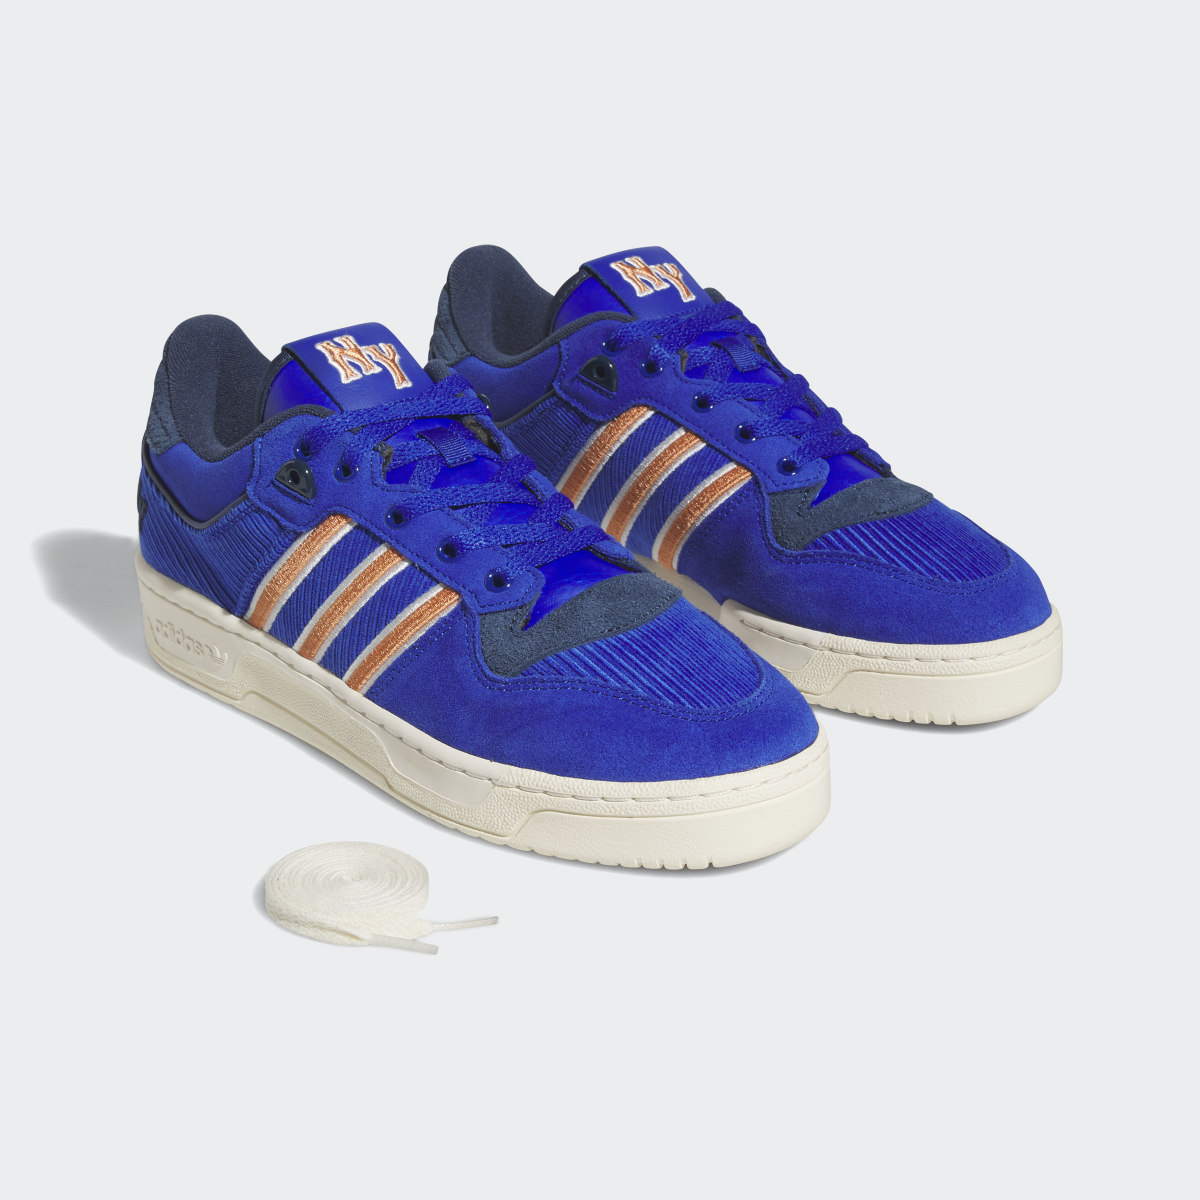 Adidas Rivalry Low 86 Shoes. 10